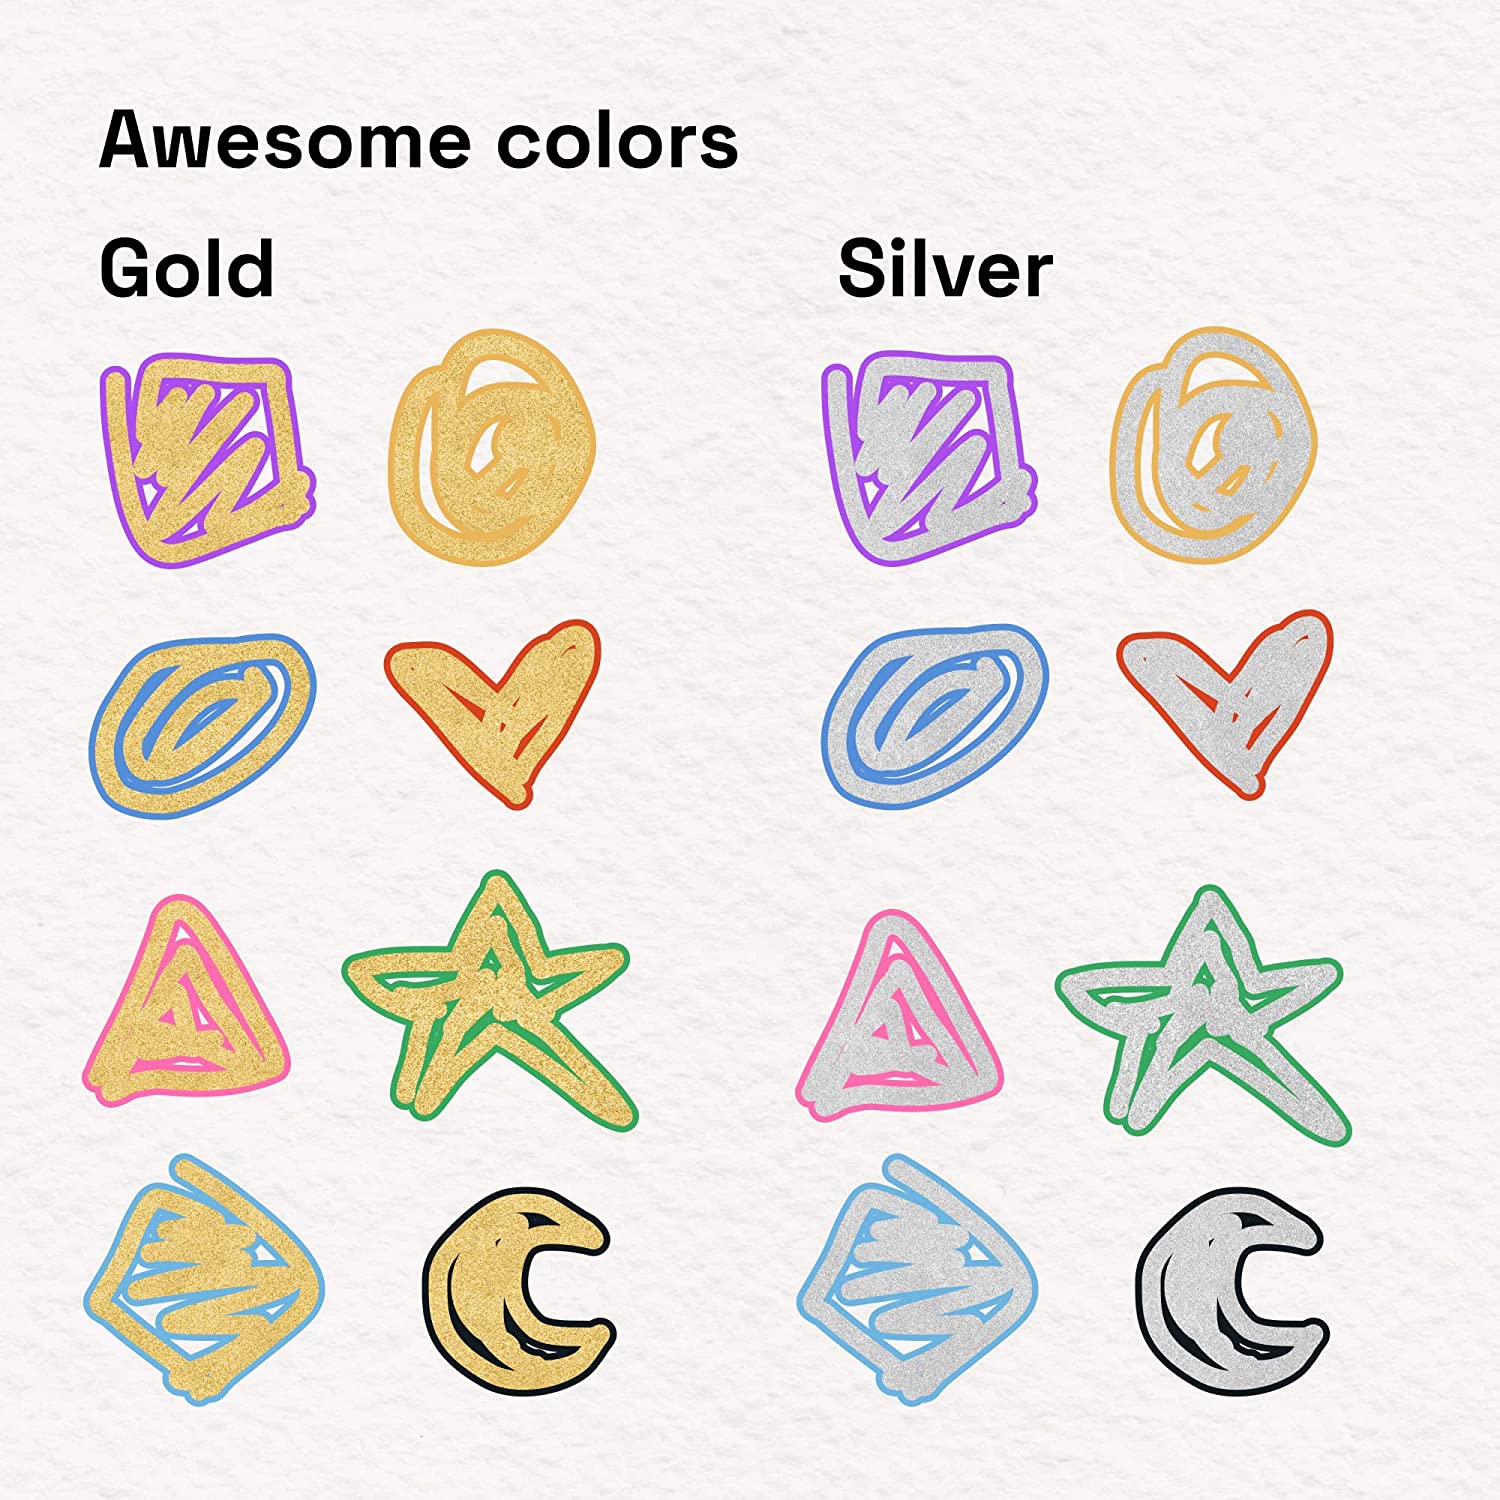 16 outline markers has awesome colors gold and silver